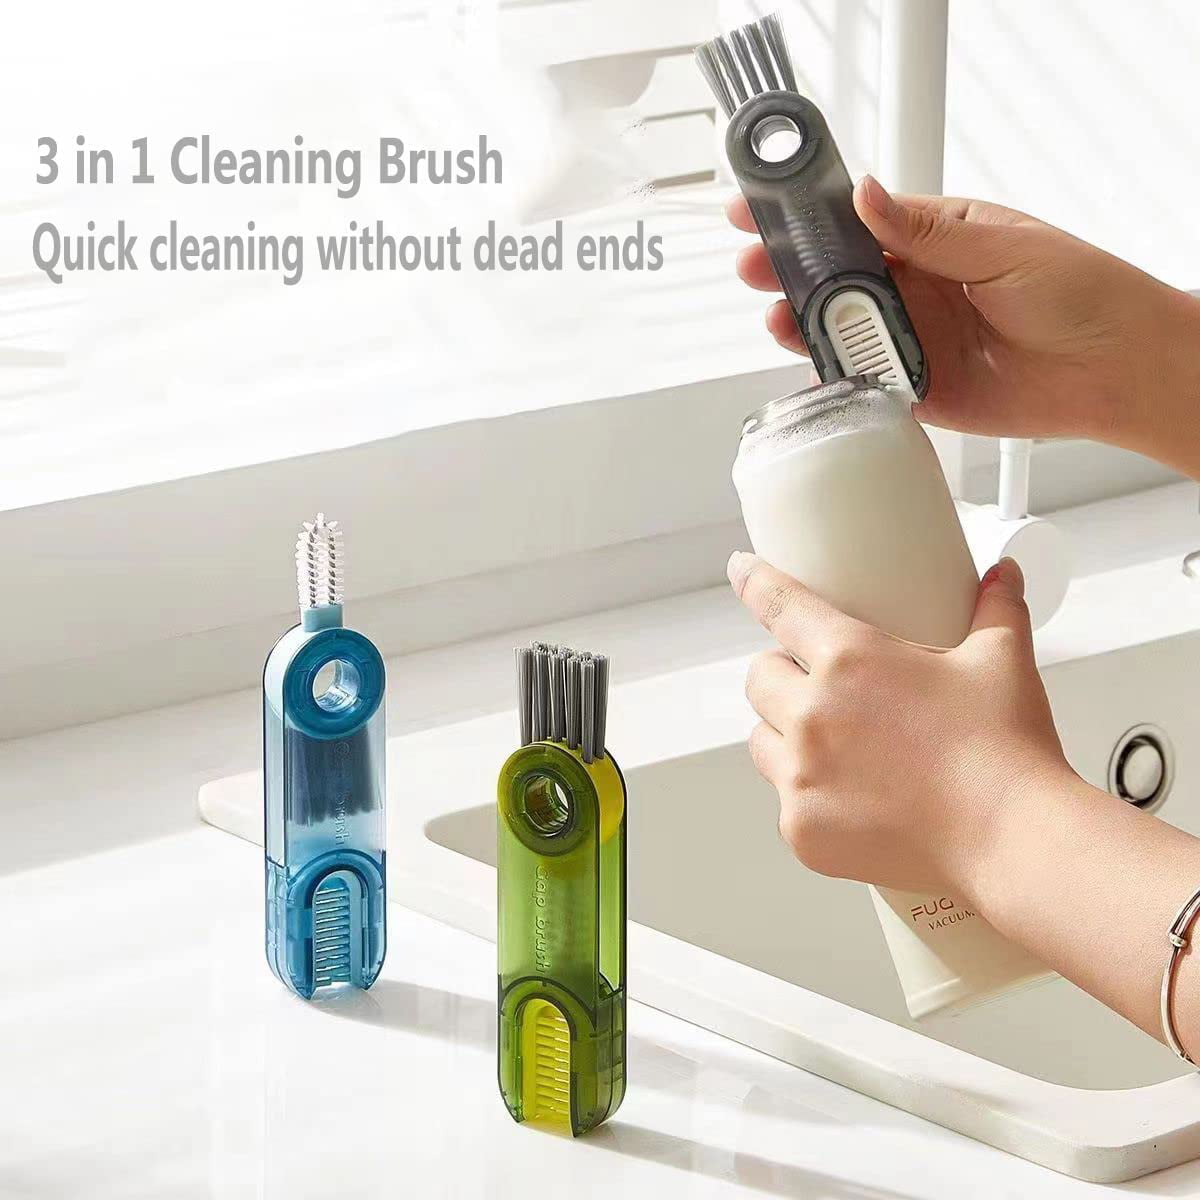 3 in 1 Multifunctional Cleaning Brush,Multi-Functional Insulation Cup  Crevice Cleaning Tools,Multipurpose Bottle Gap Cleaner Brush,3 in 1Cup Lid Cleaning  Brush Set,Home Kitchen Cleaning Tools Gray